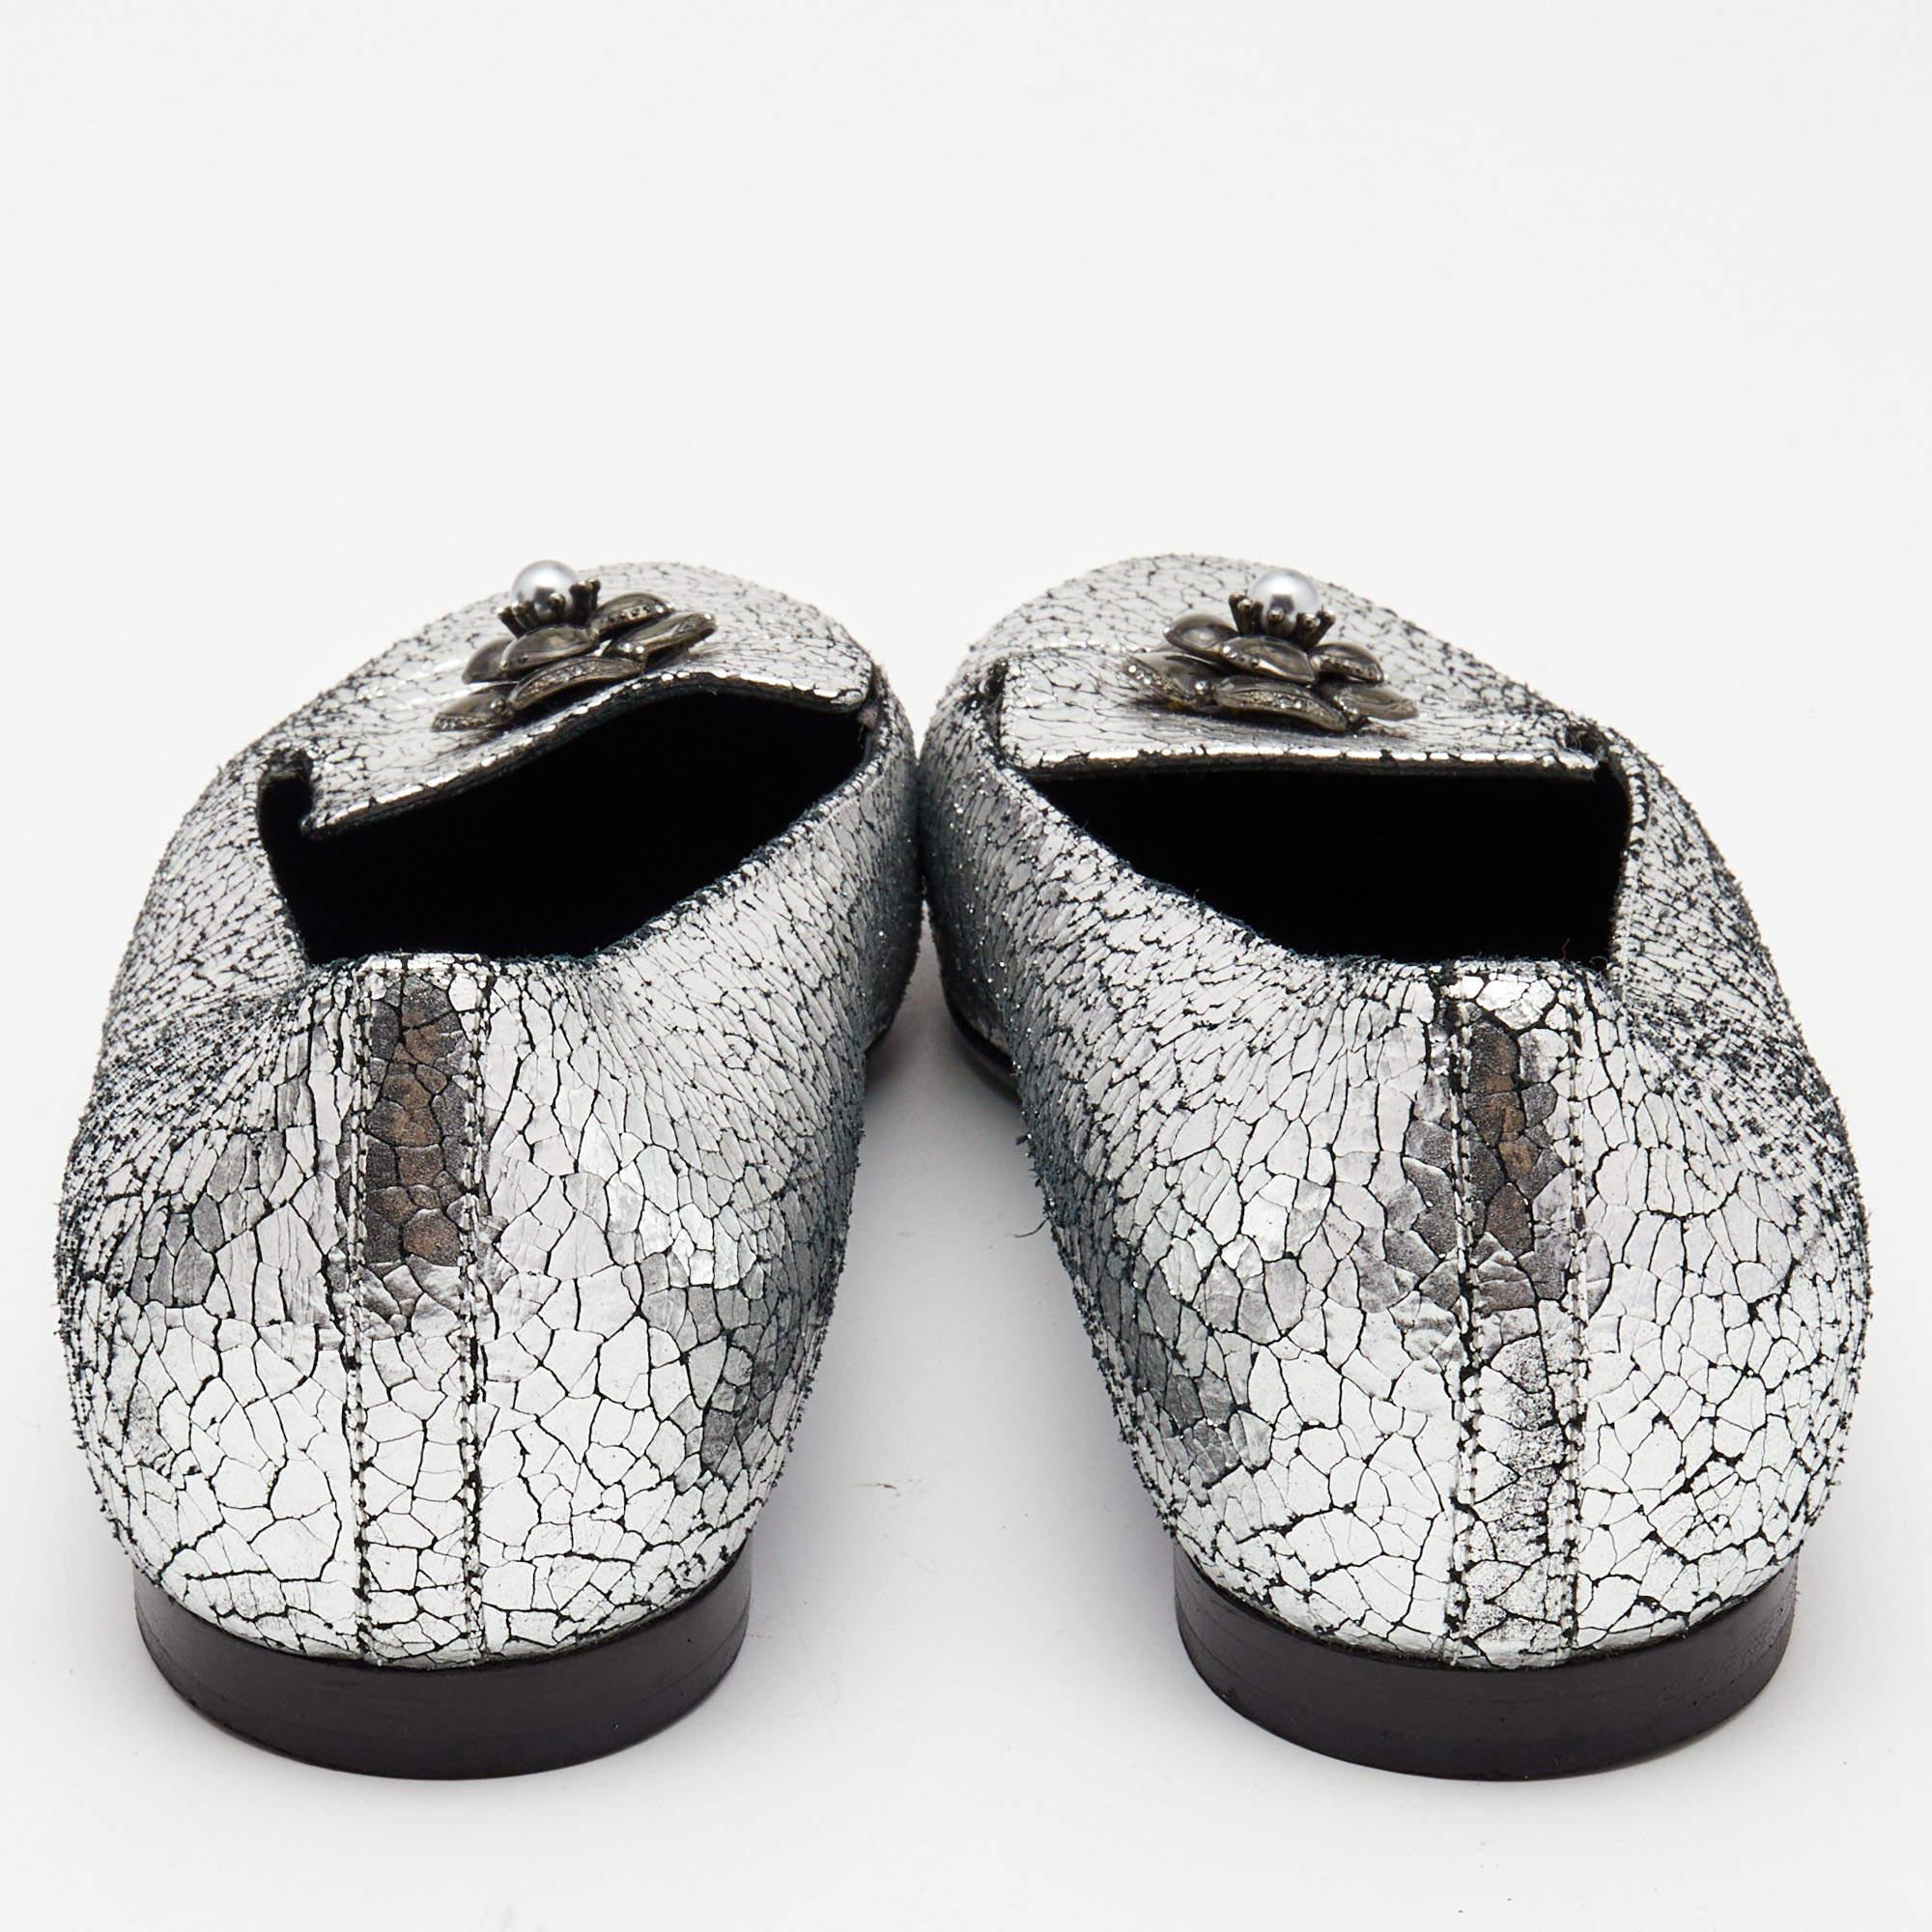 Chanel Silver Crackled Leather Interlocking CC Camelia Smoking Slippers Size 37.5
